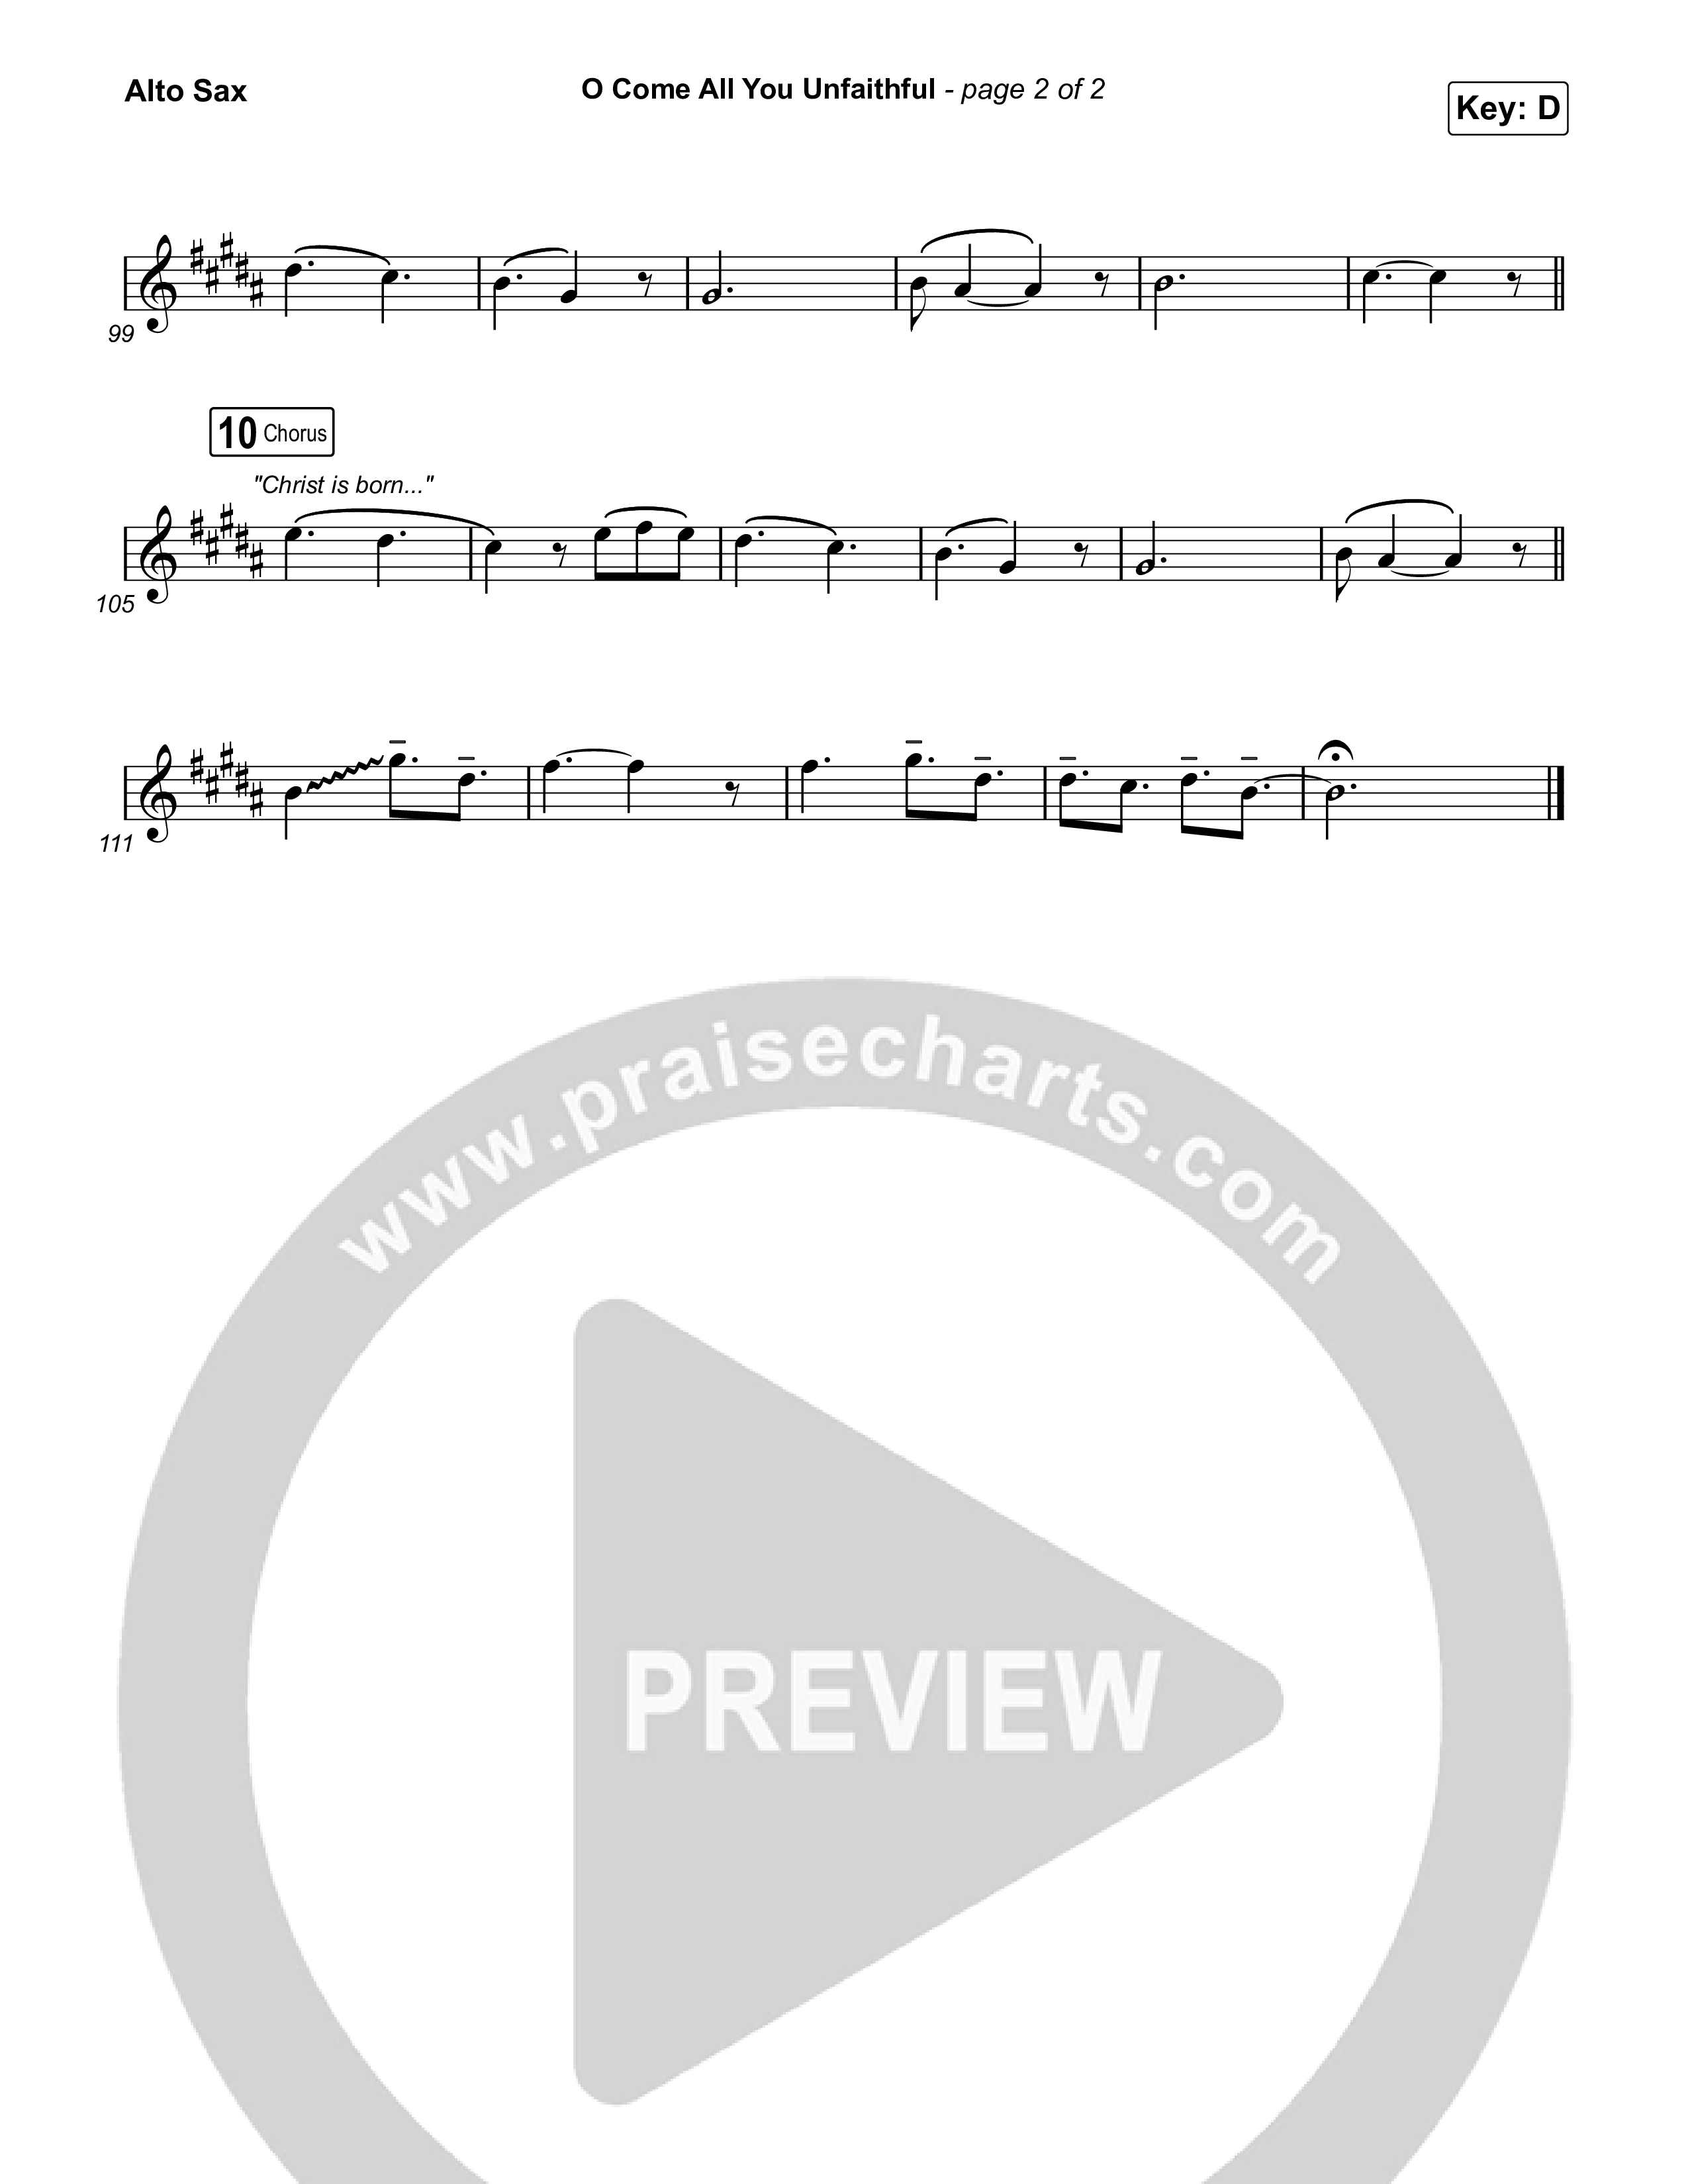 O Come All You Unfaithful Sax Pack (Brooke Voland / Arr. Travis Cottrell / Orch. Mason Brown)